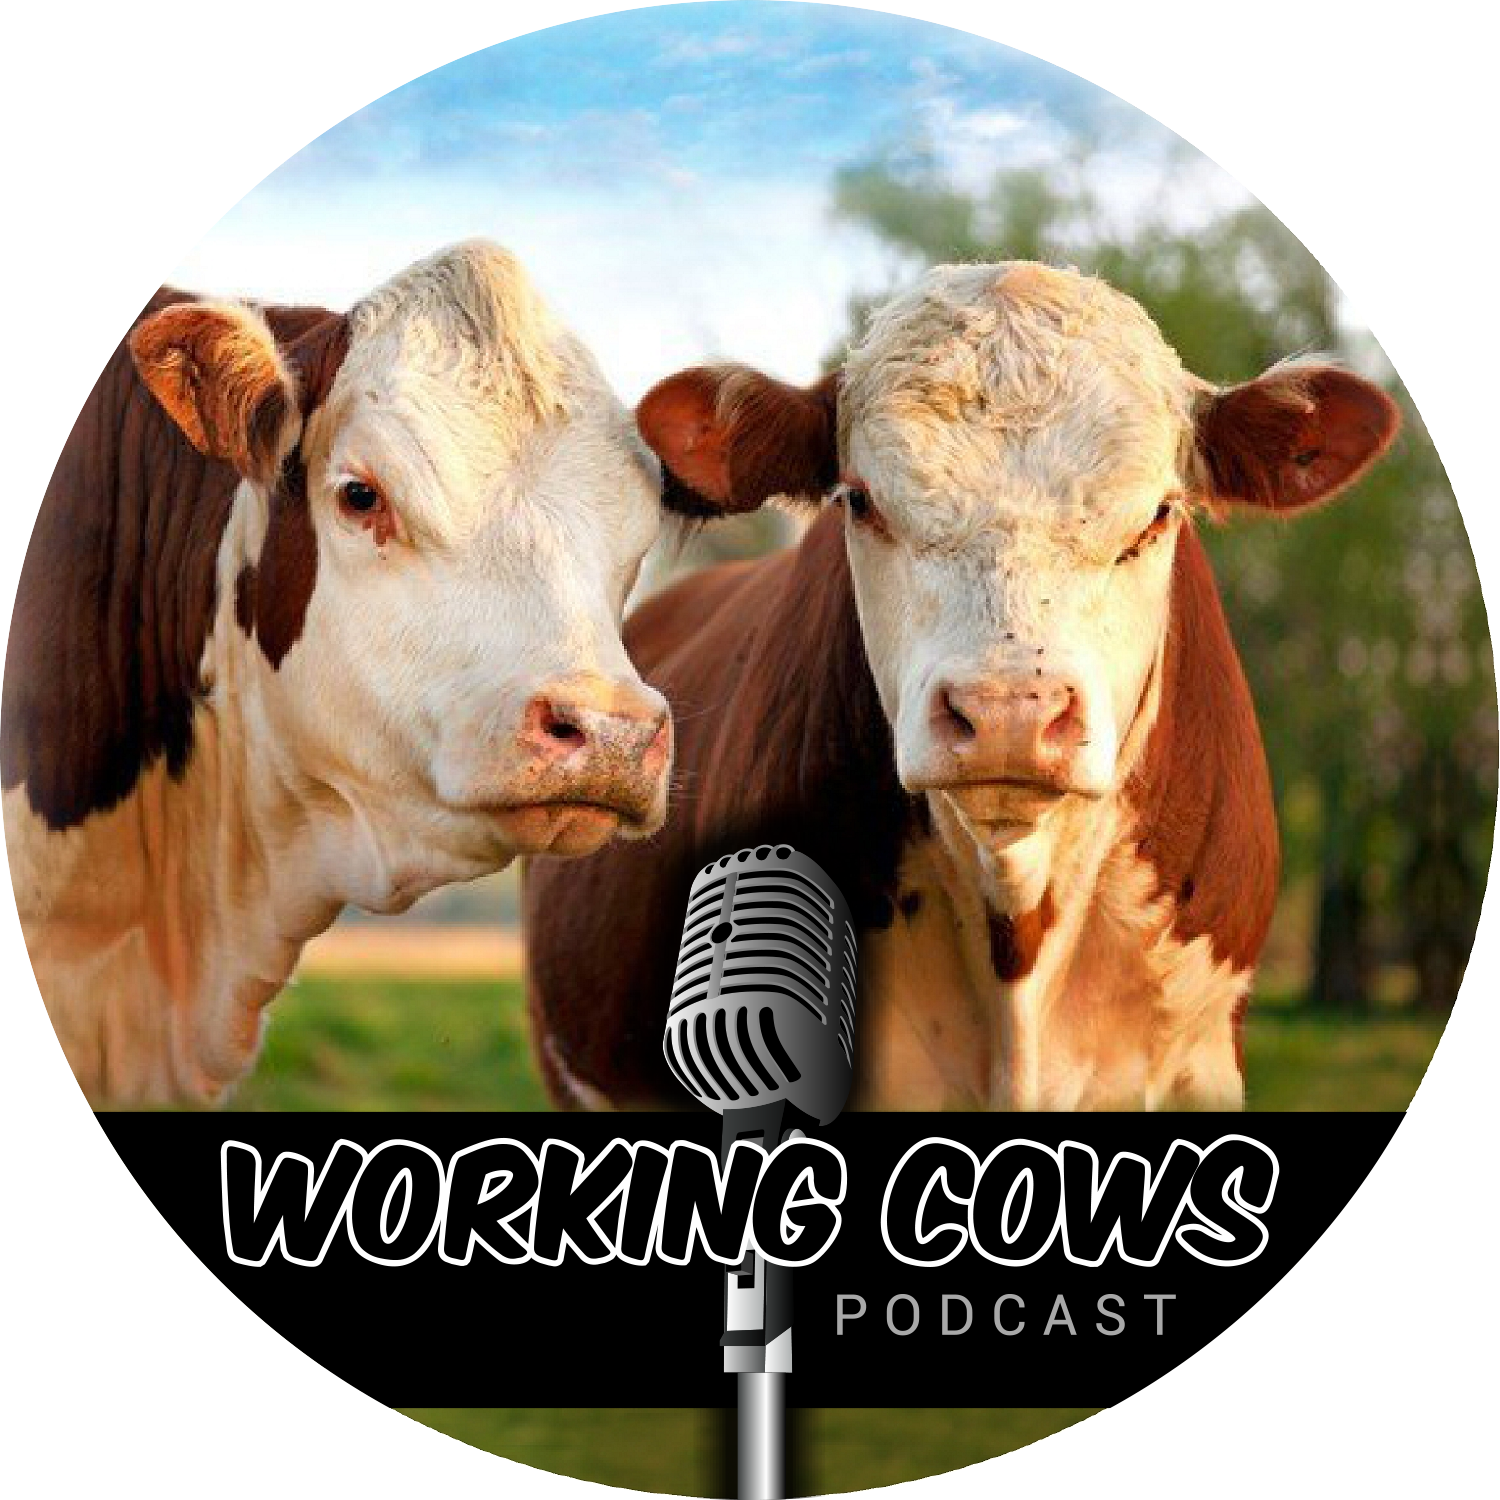 Sea-90 Featured on Working Cows Podcast Episode 282